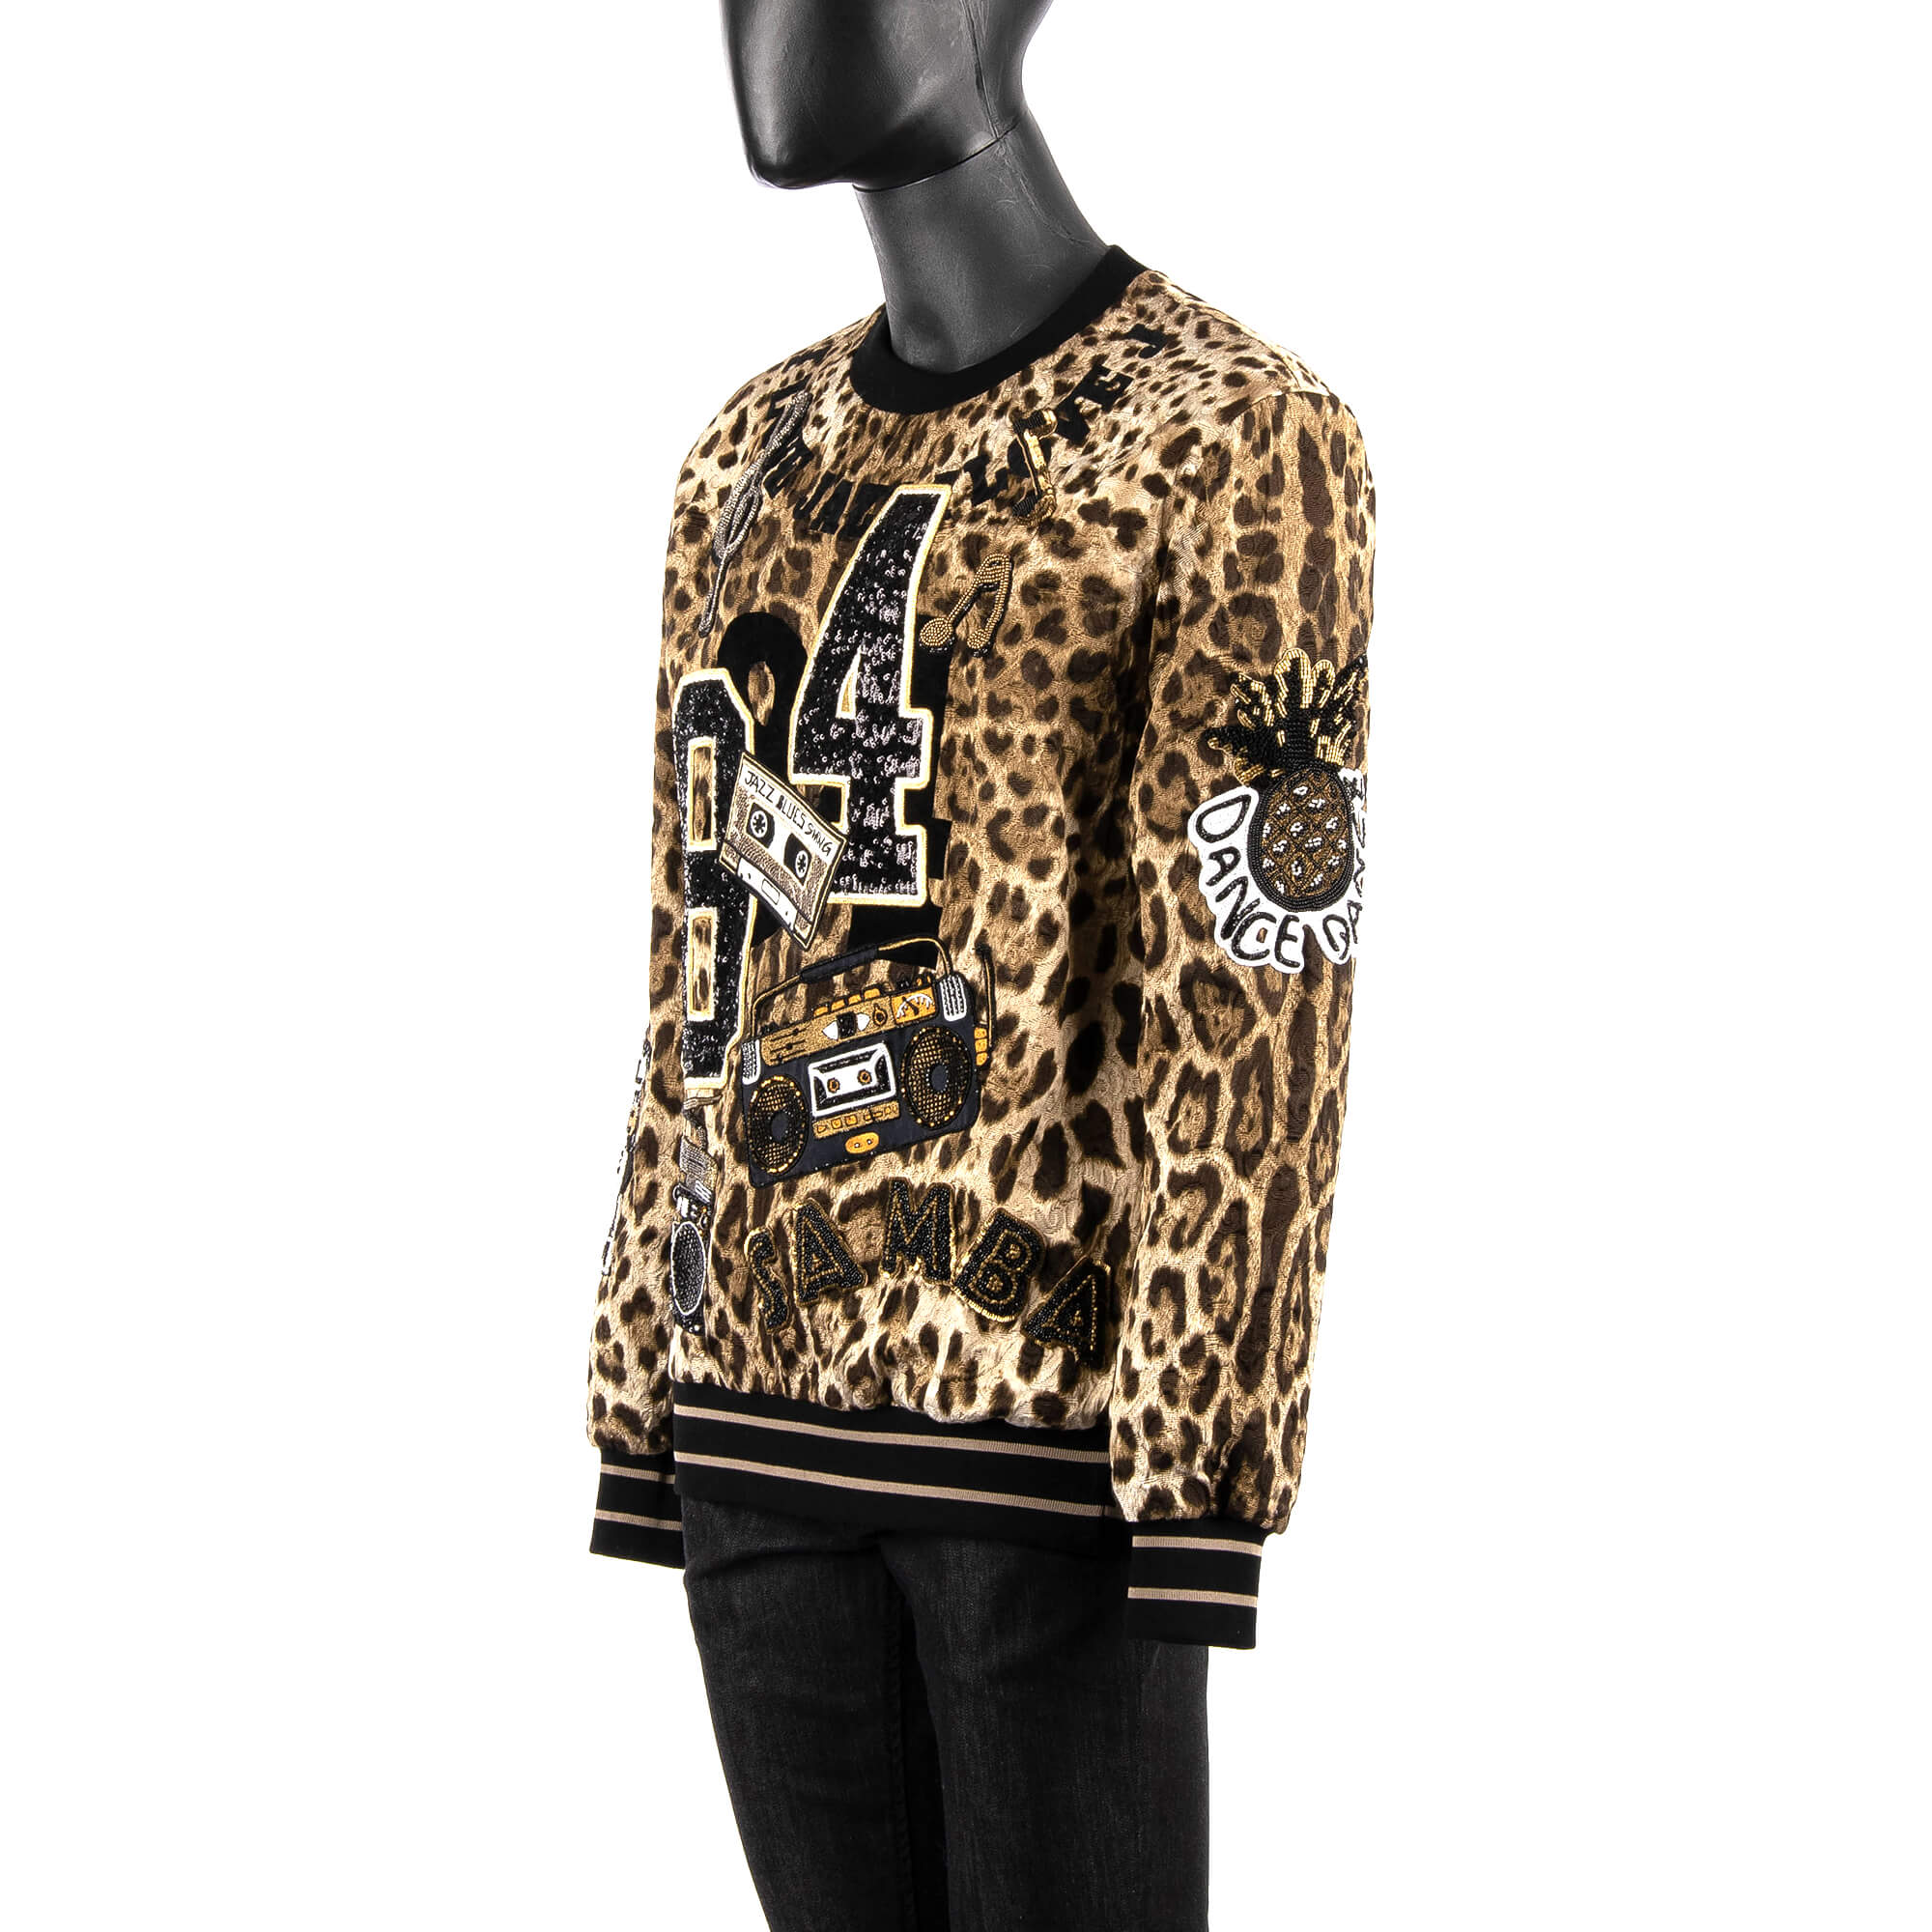 DOLCE-GABBANA-Leopard-Sweater-with-Music-Jazz-Blues-Embroidery-Black-2.jpg